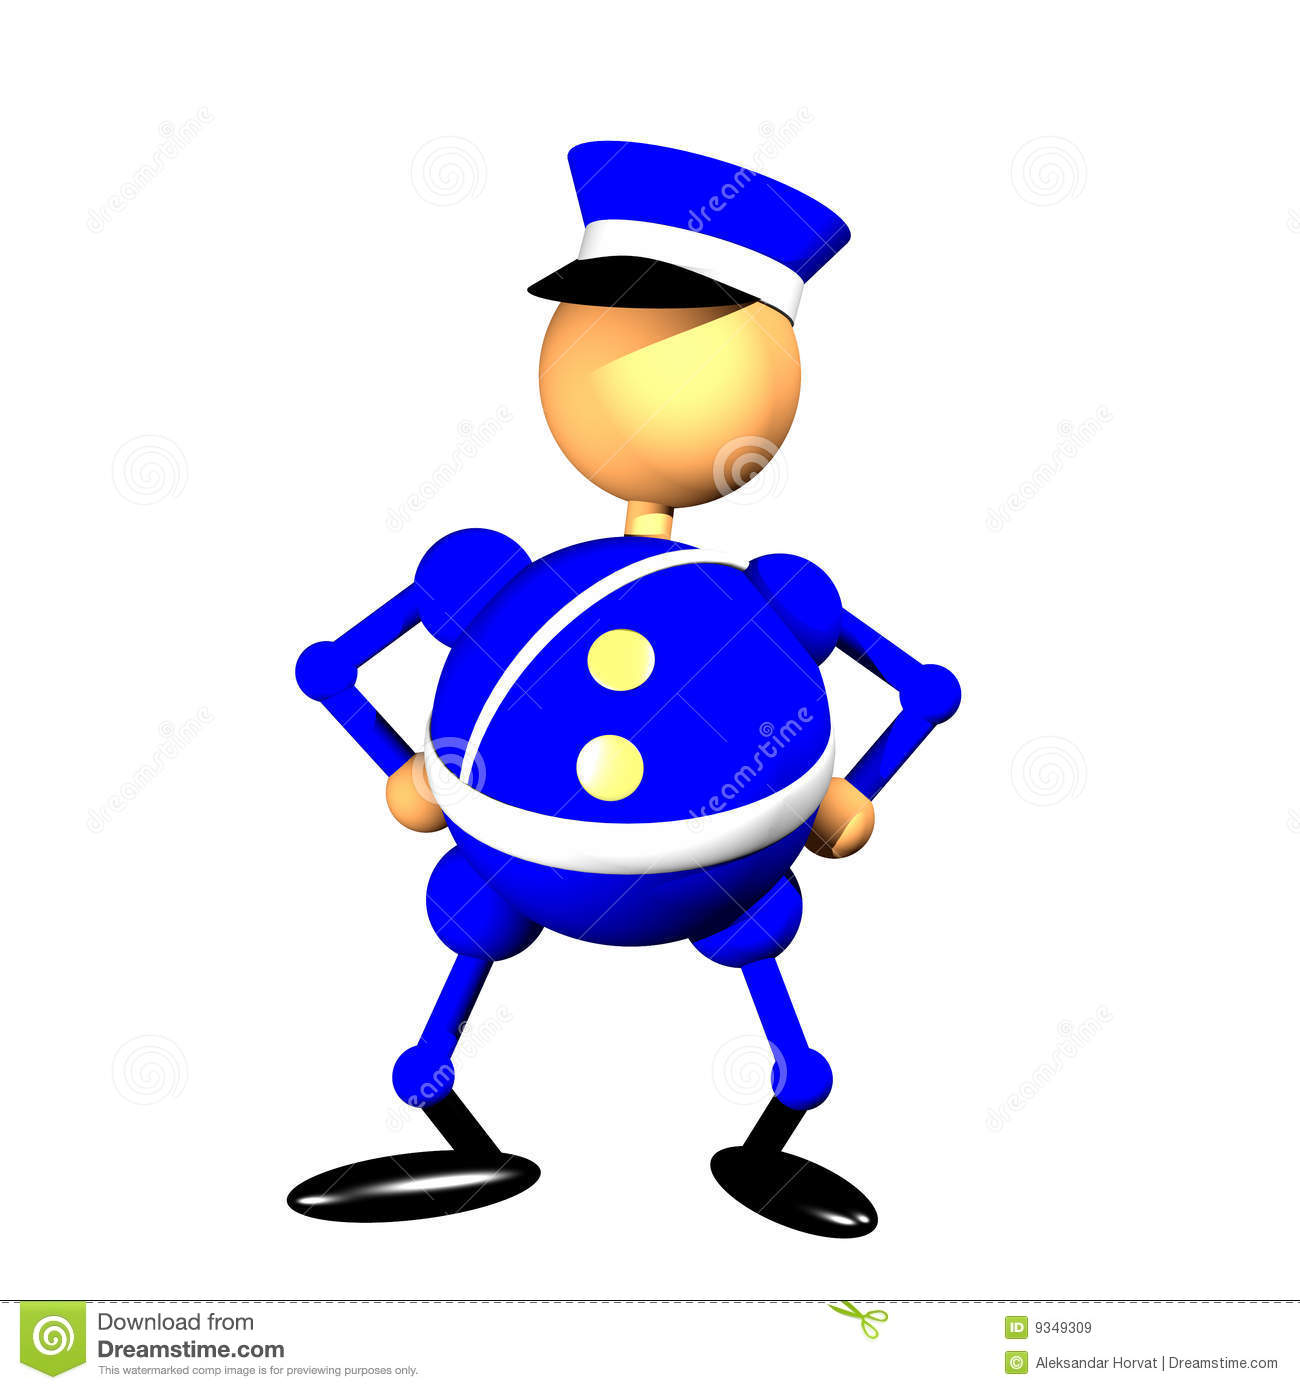 Policeman Clipart Royalty Free Stock Images   Image  9349309